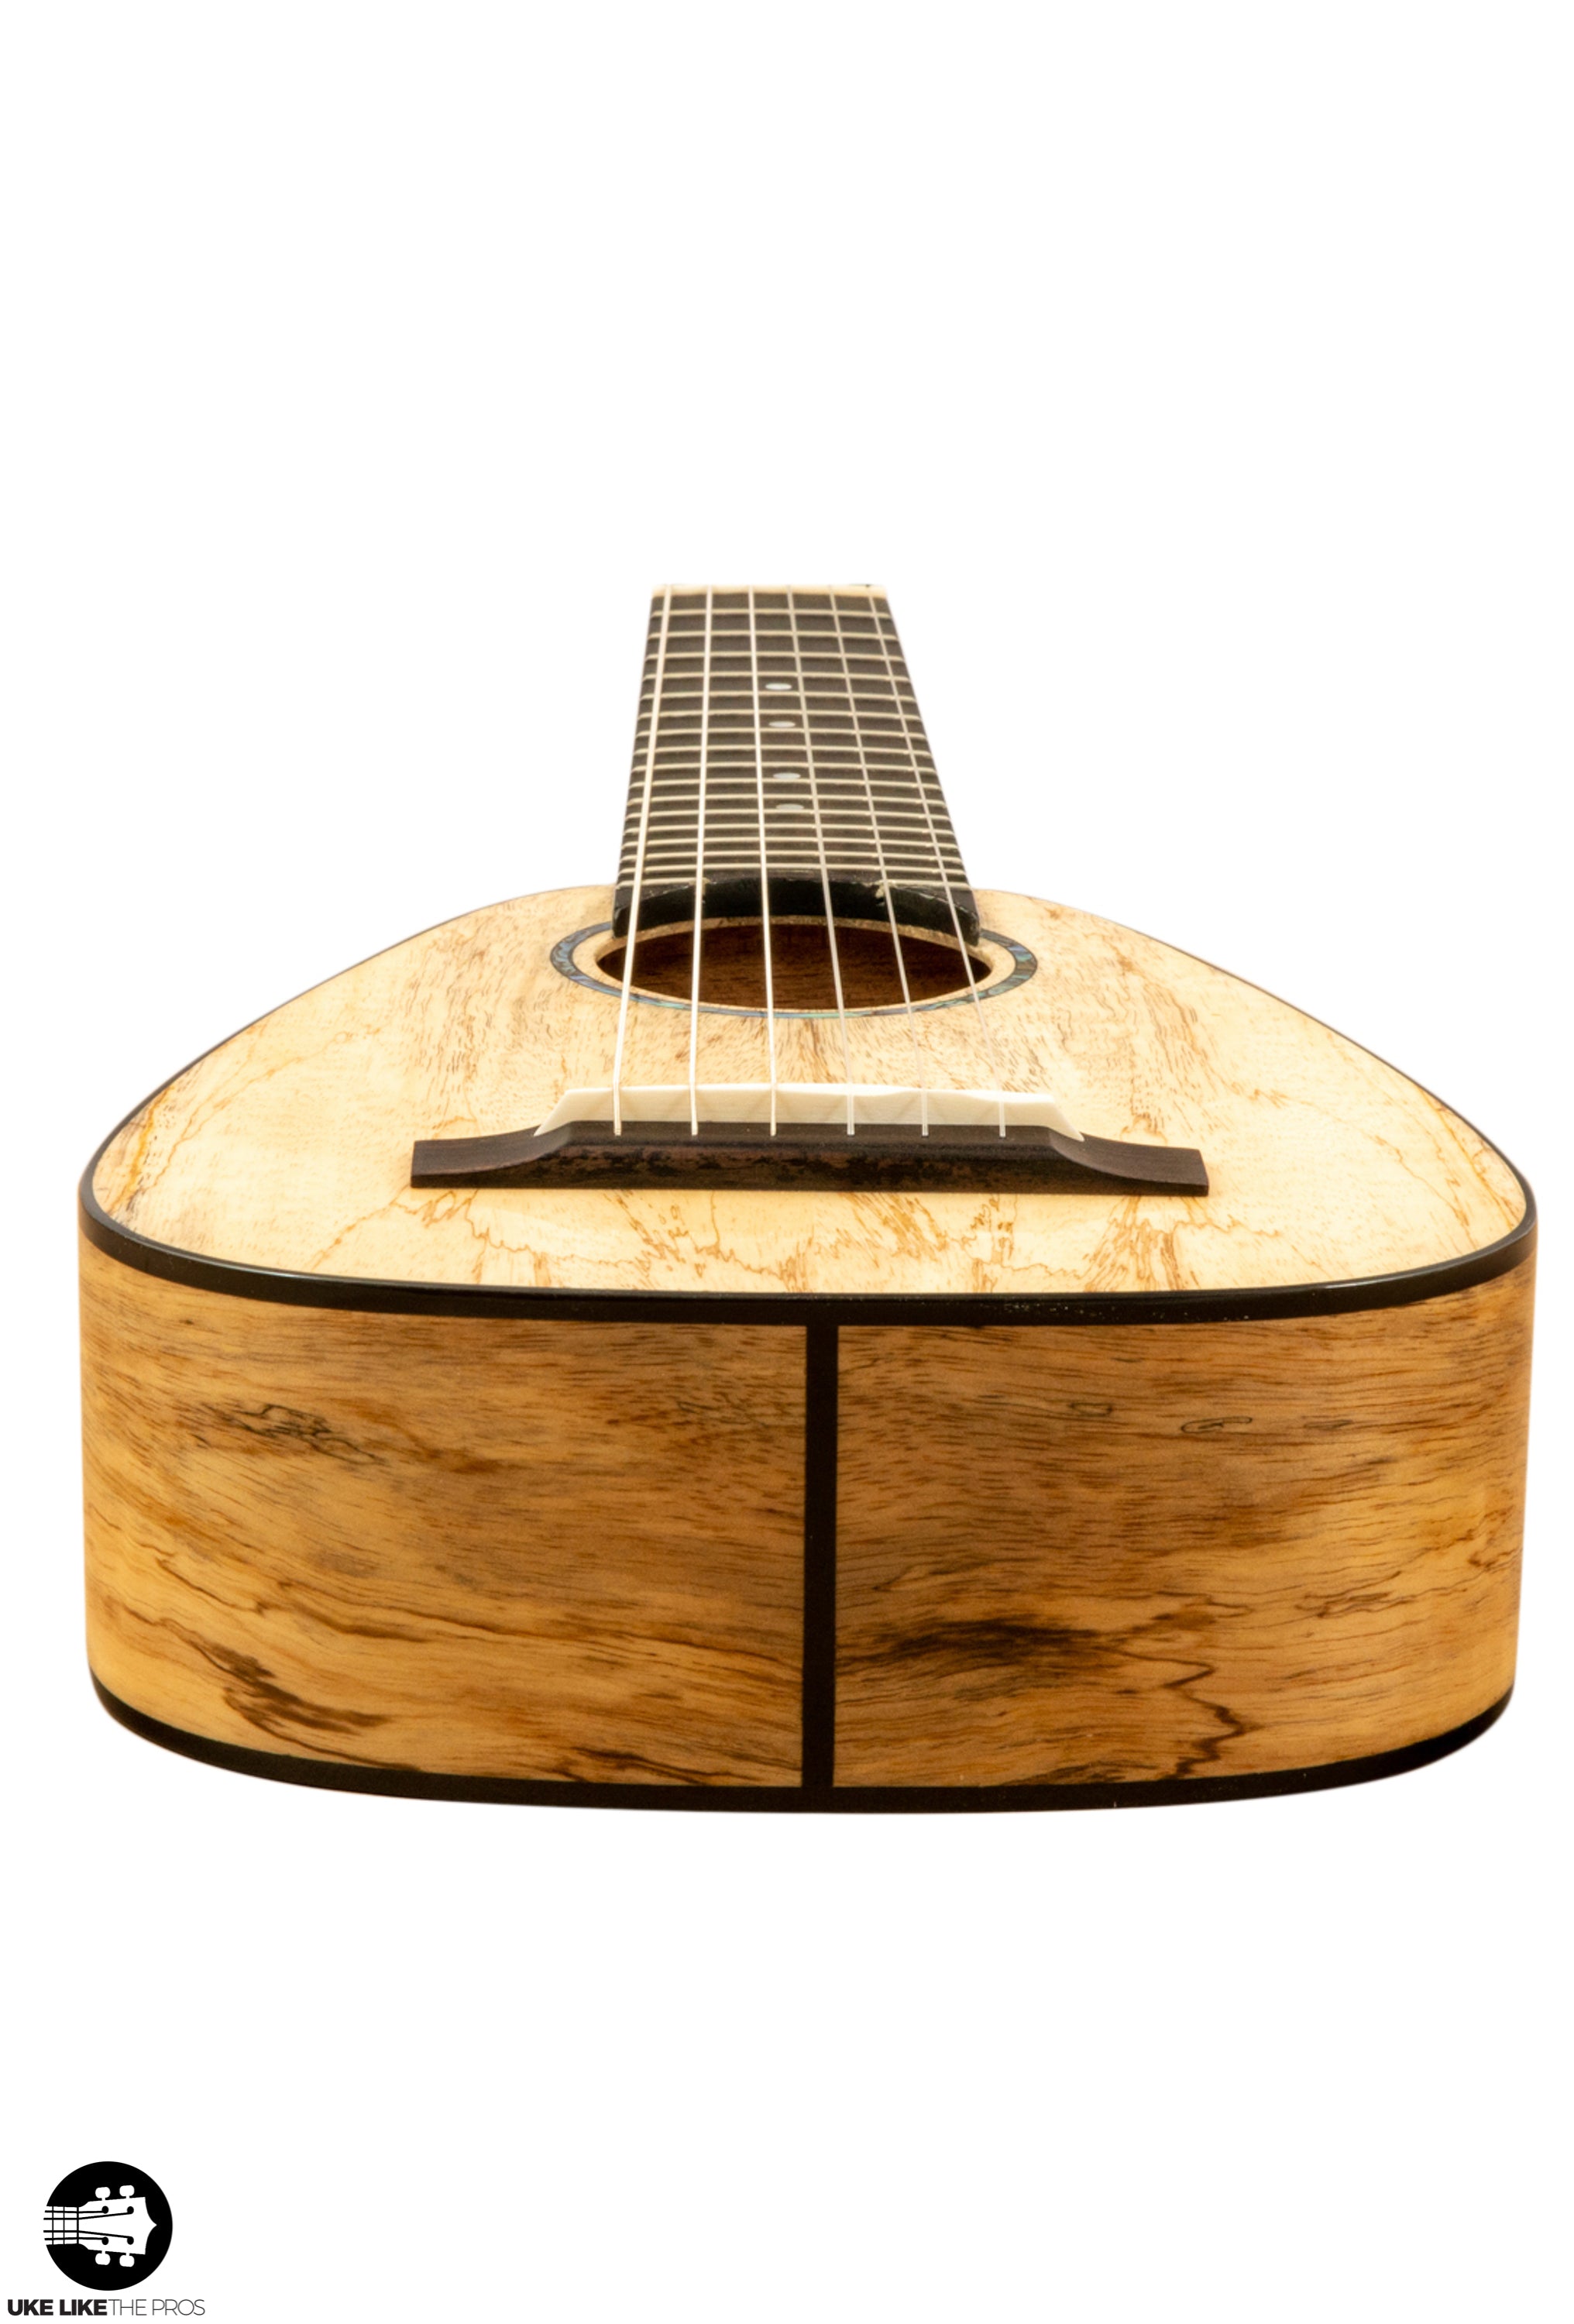 Romero Creations RC-TT6-MG 6 String Guilele Spalted Mango "Conrad" Tuned A to A